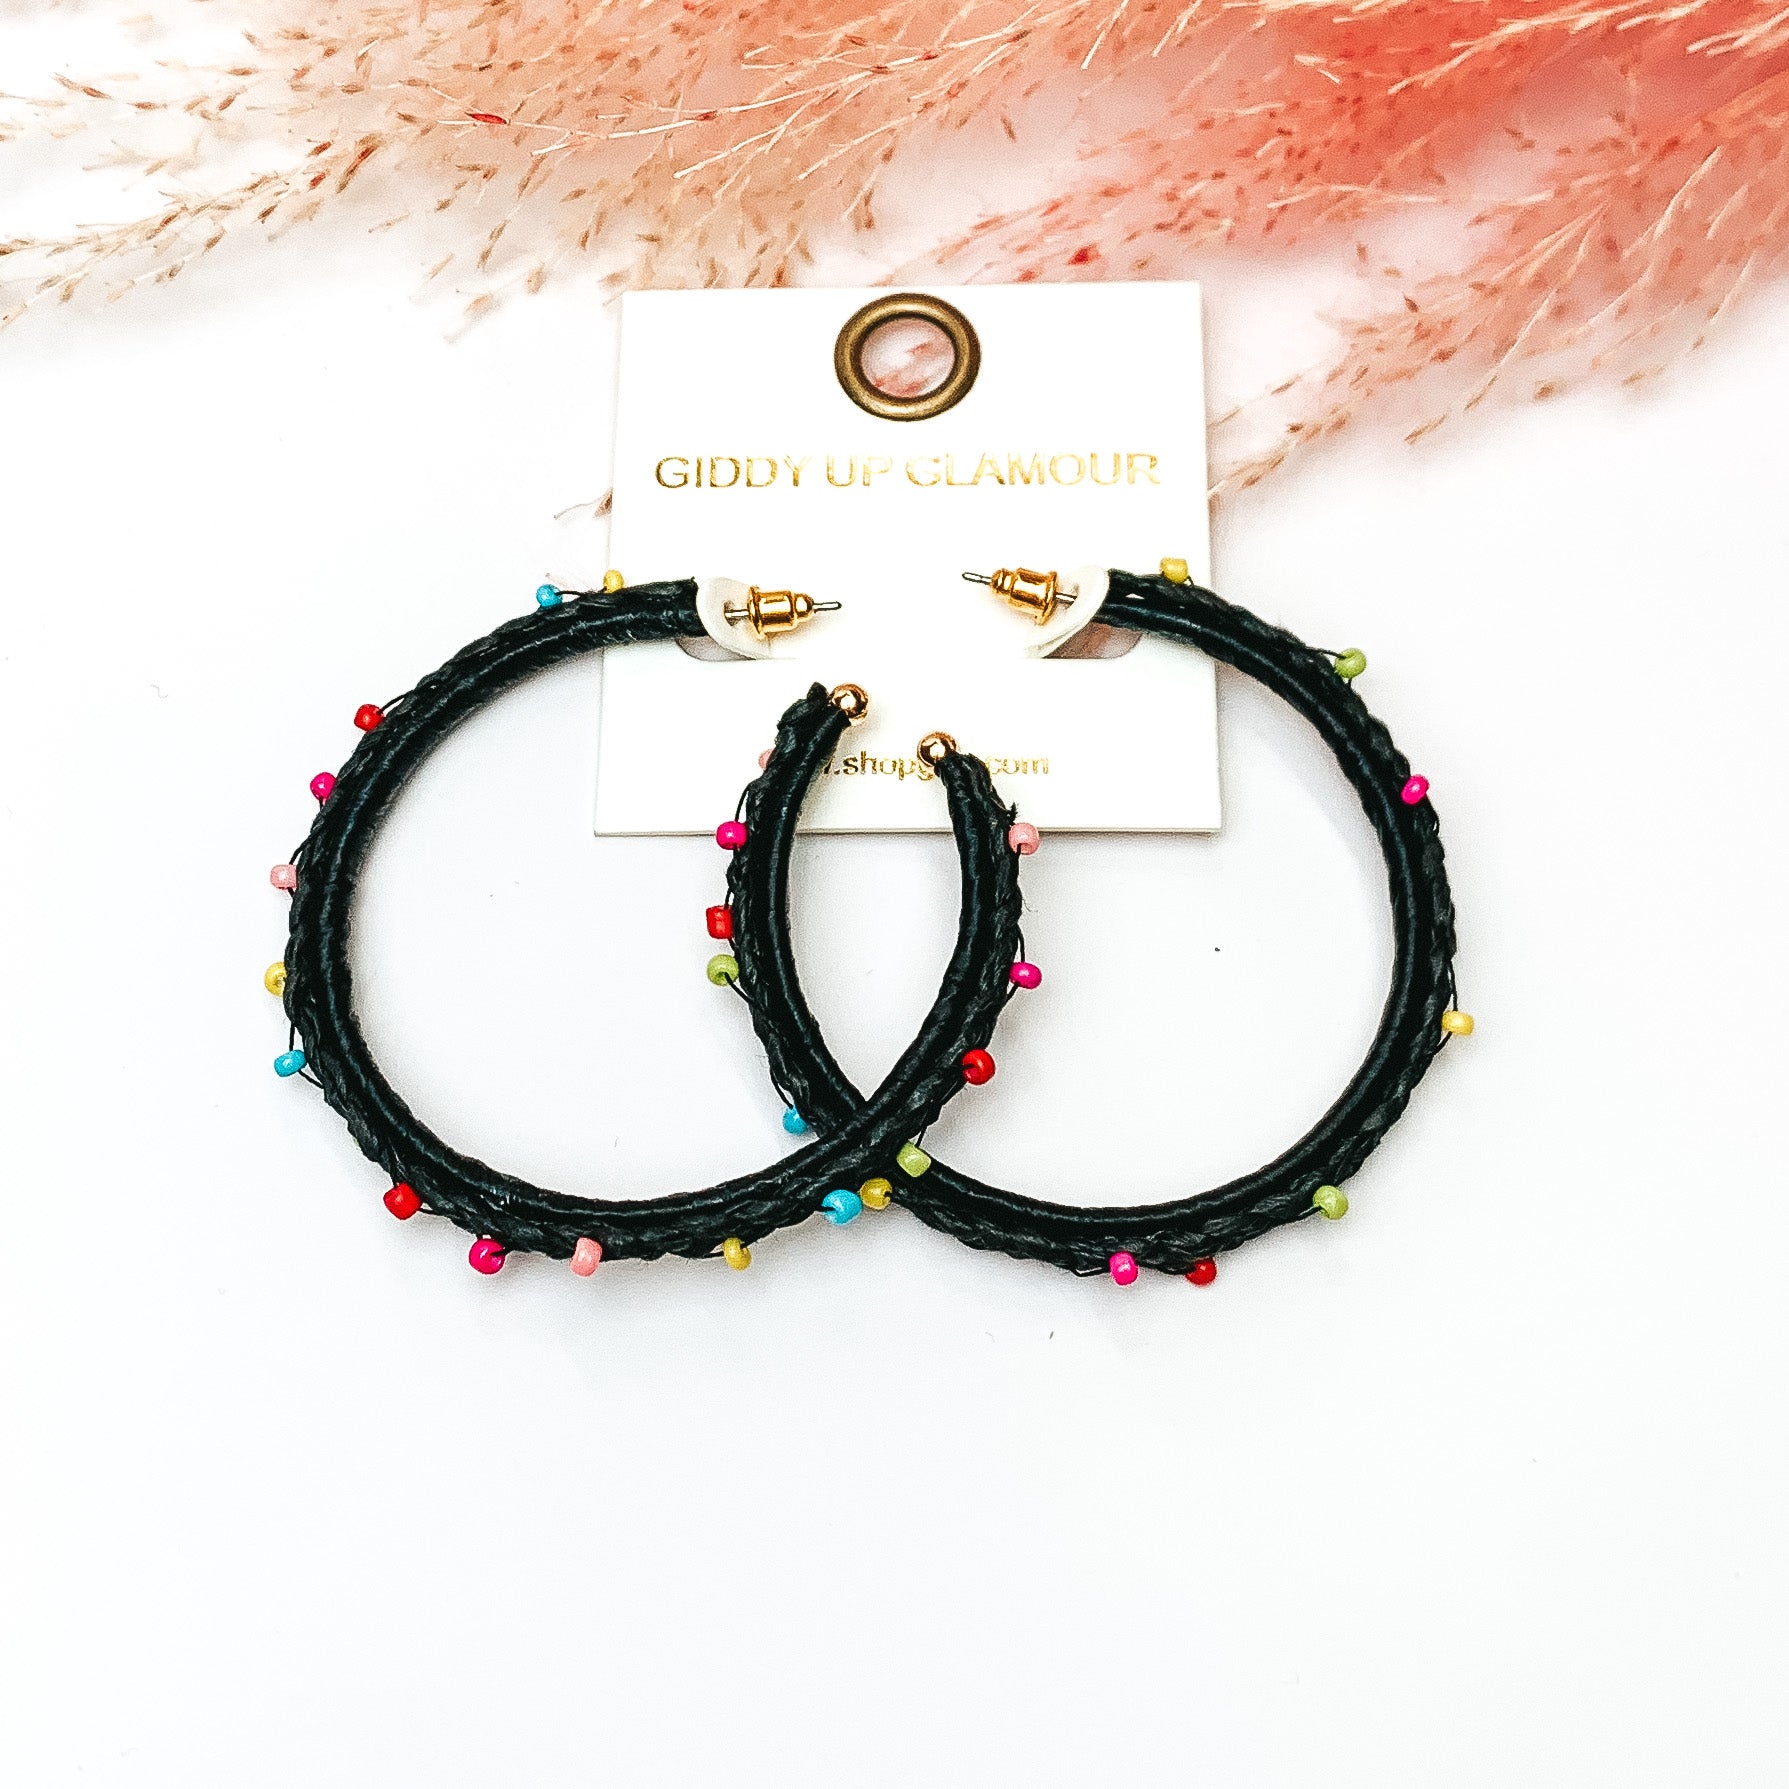 Pictured are raffia braided hoop earrings in black with colorful beads. They are pictured with a pink feather on a white background.